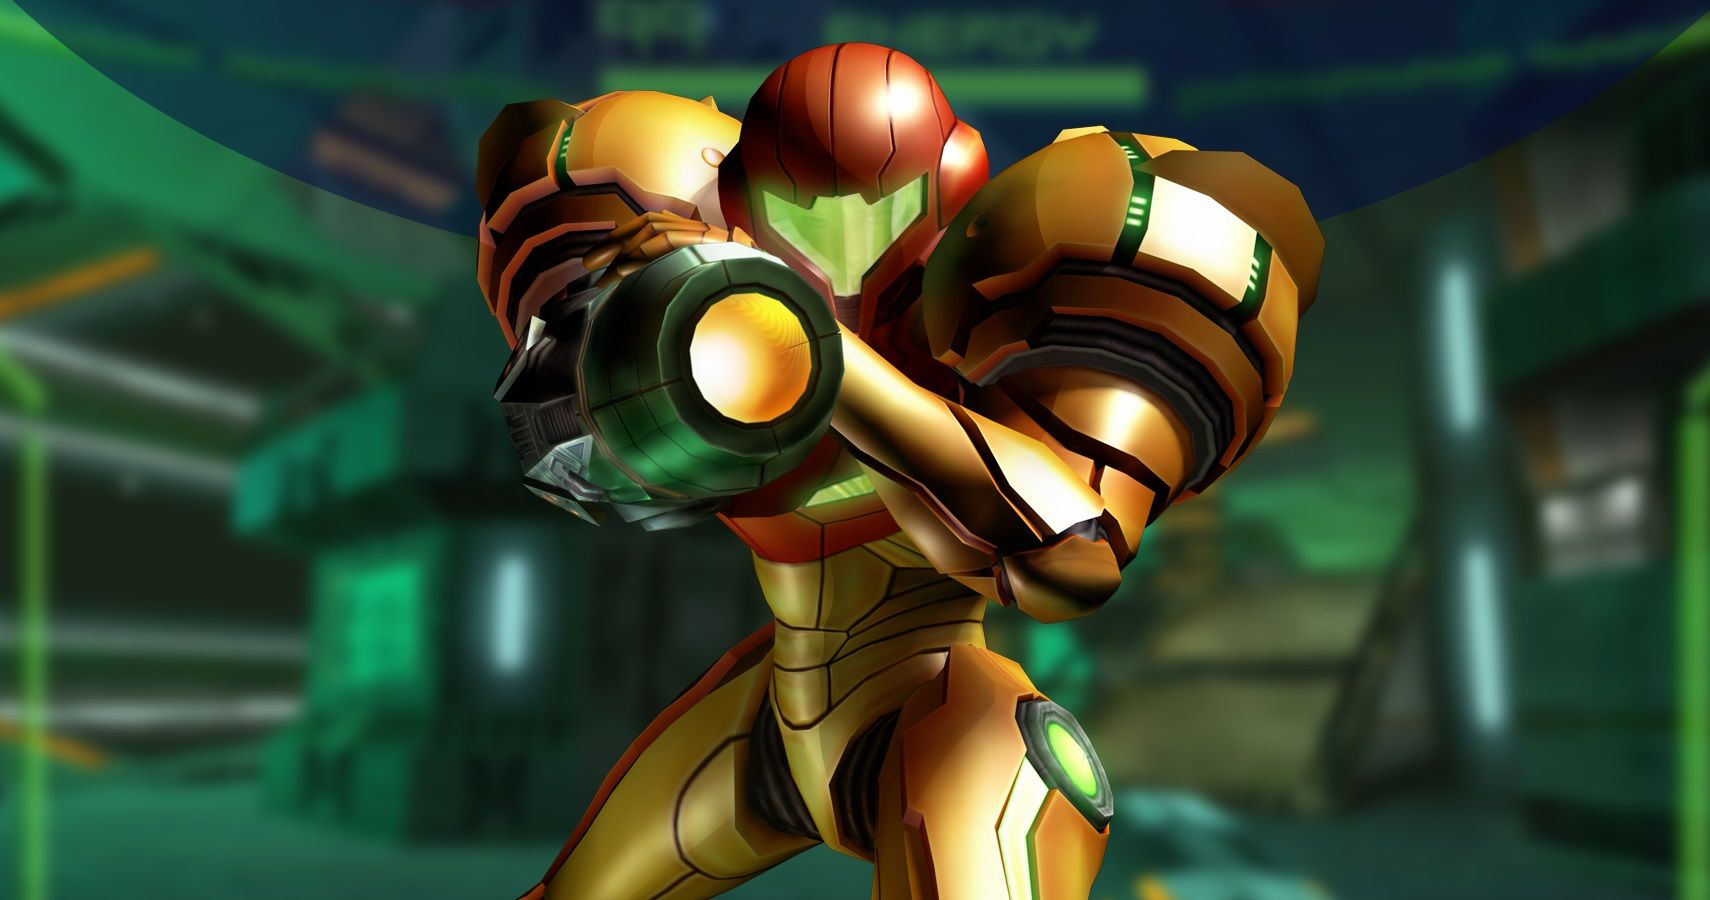 will there be a metroid prime 4